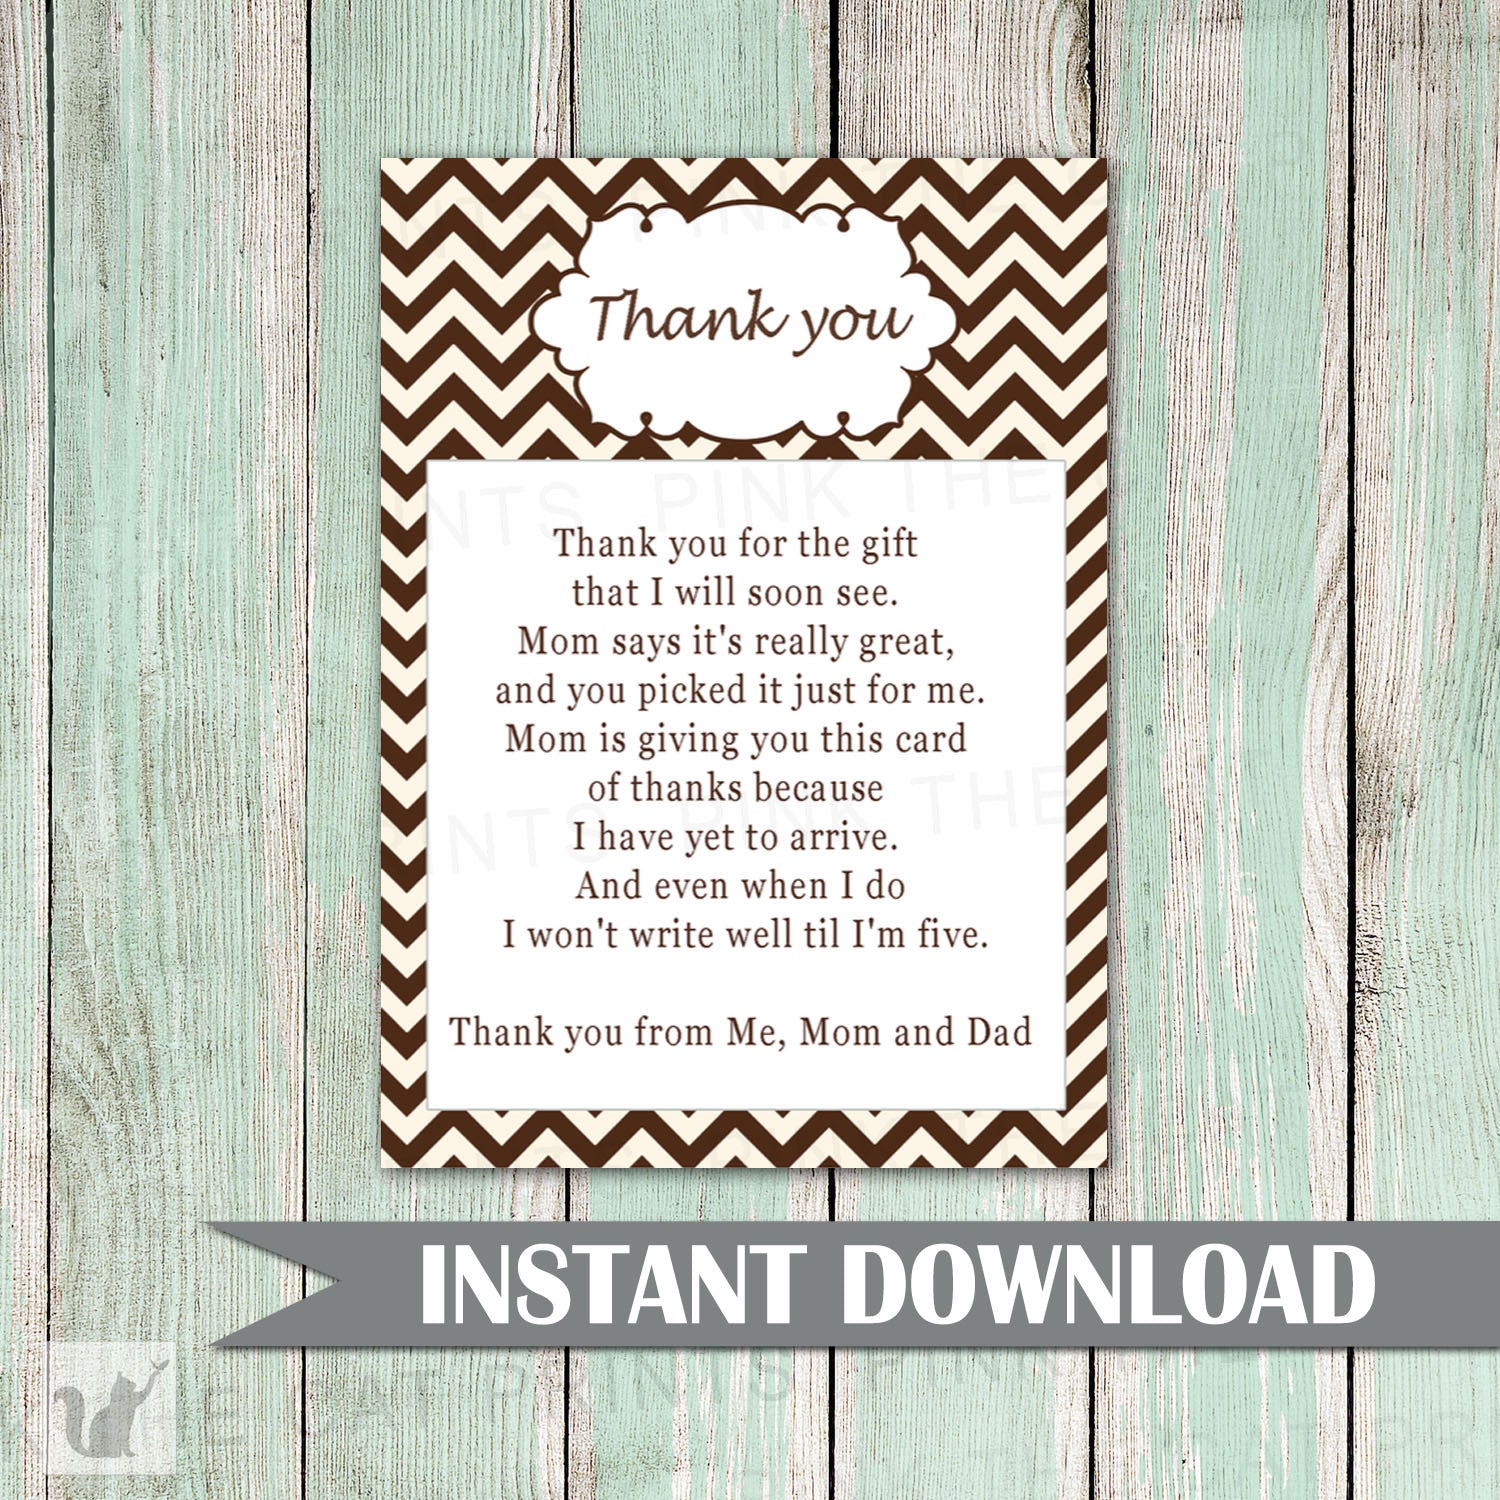 Printable Brown Chevron Zig Zag Pattern Unisex Baby Shower Thank You Card Note - Party Thank You Card Boy Girl Ivory INSTANT DOWNLOAD